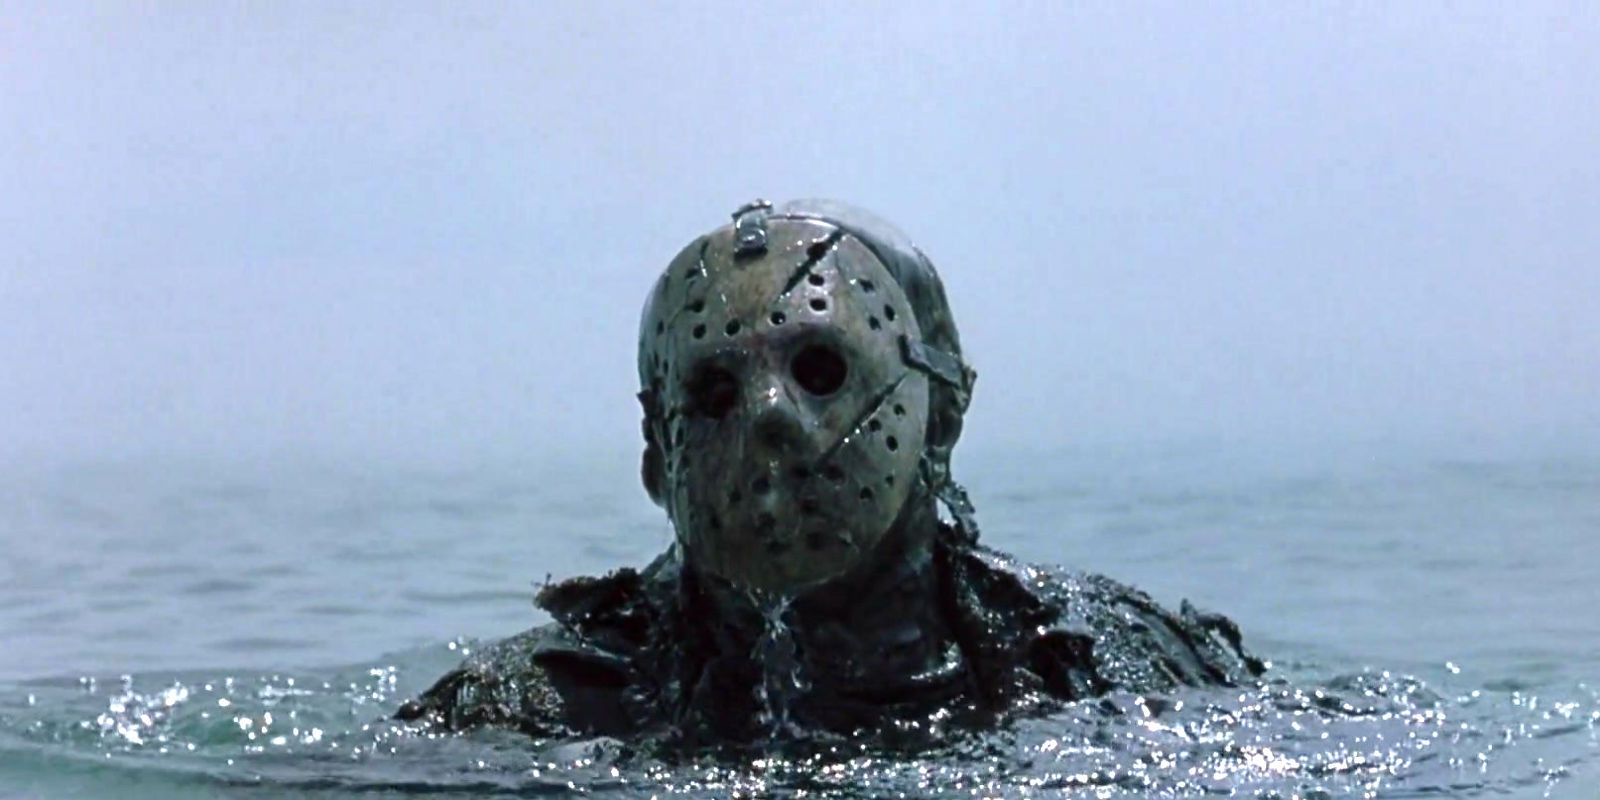 Jason Vorhees coming out of the water in Freddy vs Jason